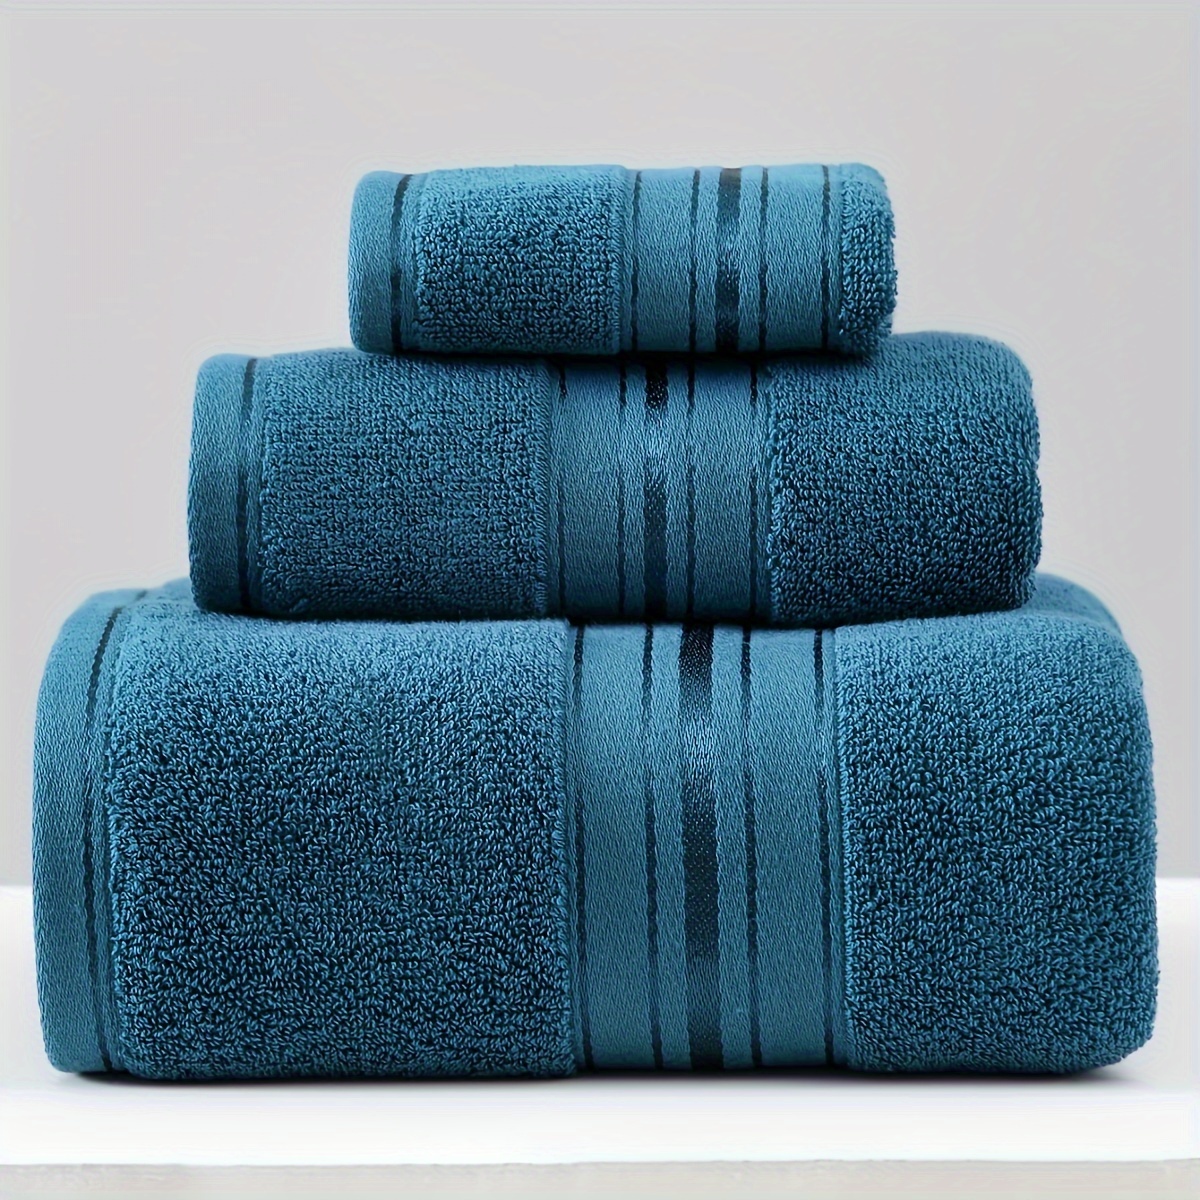 

Luxury 3-piece Cotton Bath Towel Set - Ultra-soft, Highly Absorbent & Thick For Everyday Use And Essential Bathroom Accessories Perfect For Cozy Home Comforts